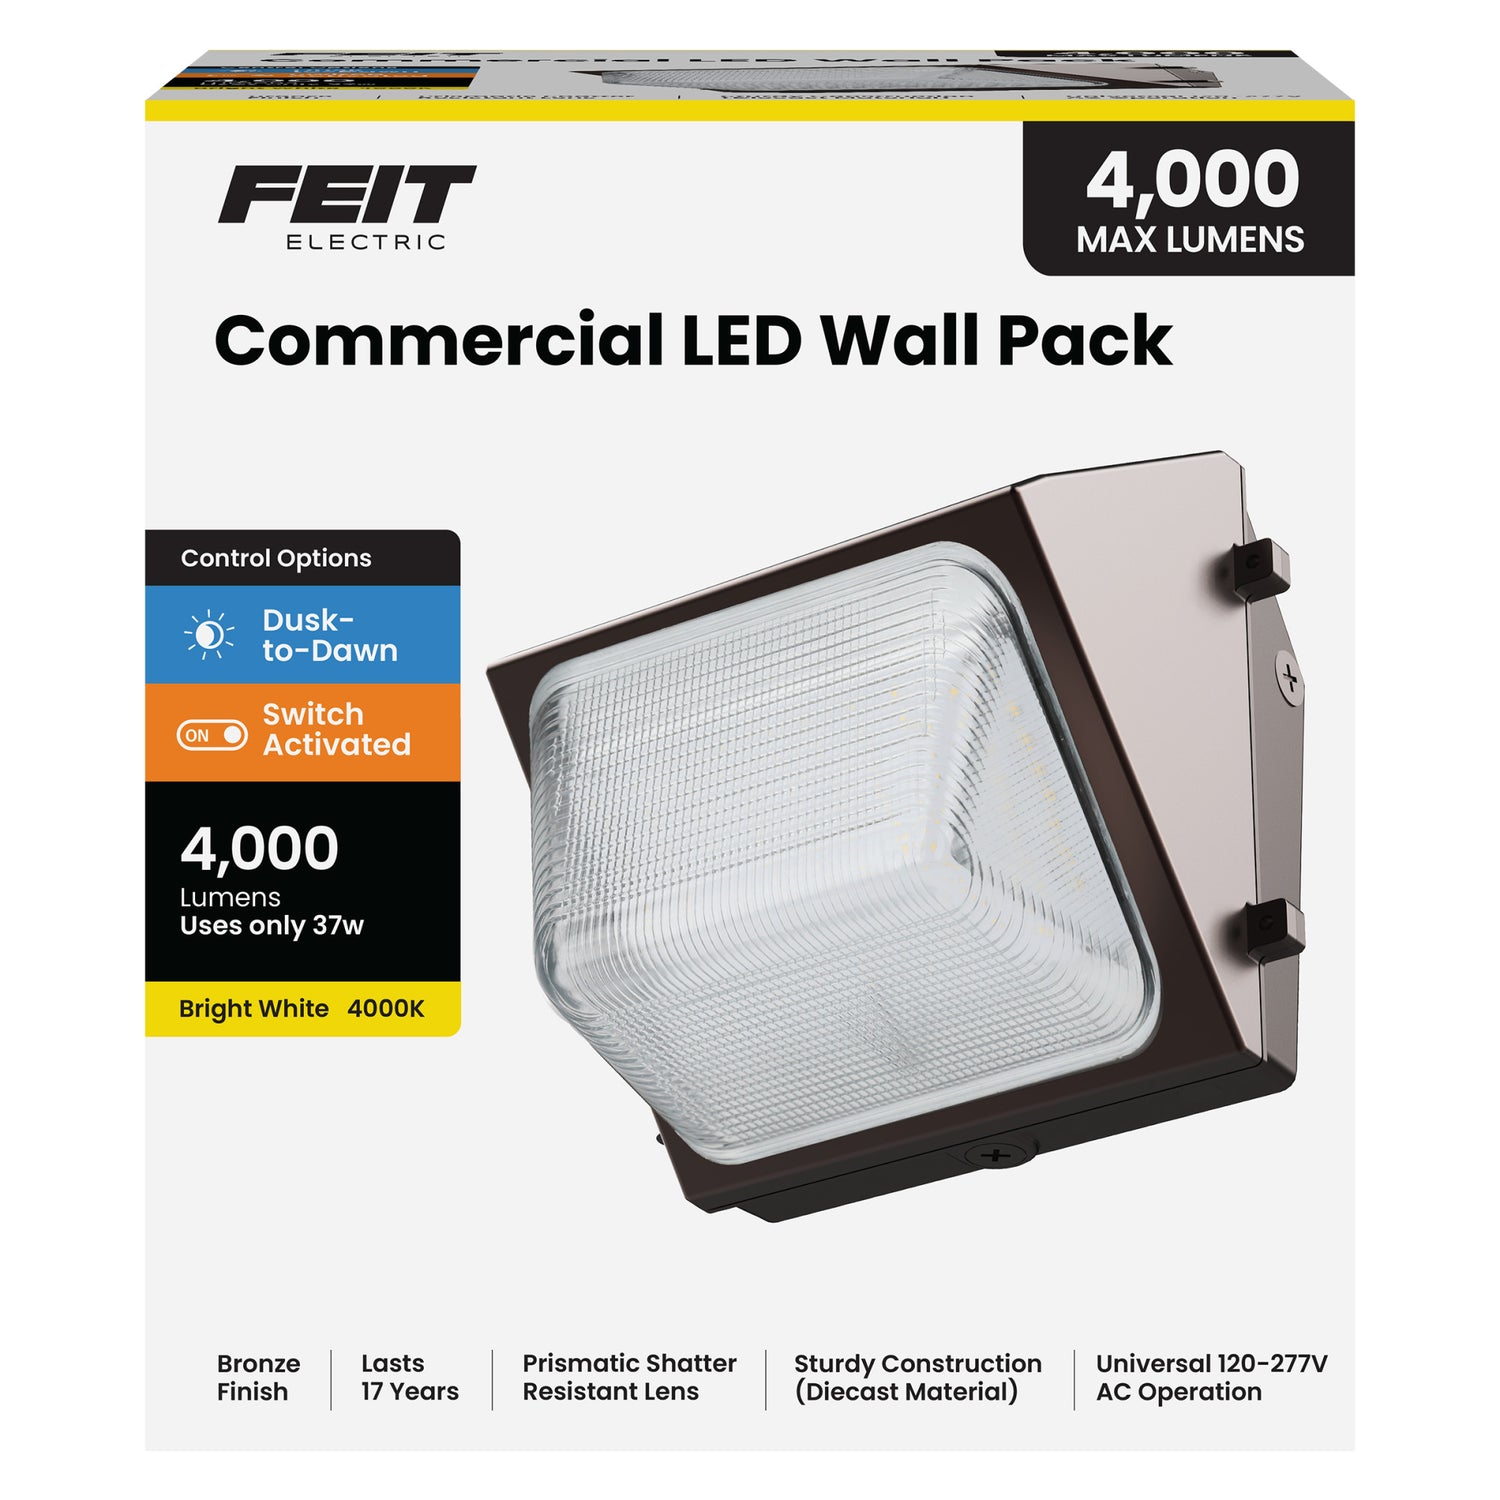 37W Bright White (4000K) Commercial LED Wall-Pack Security Light